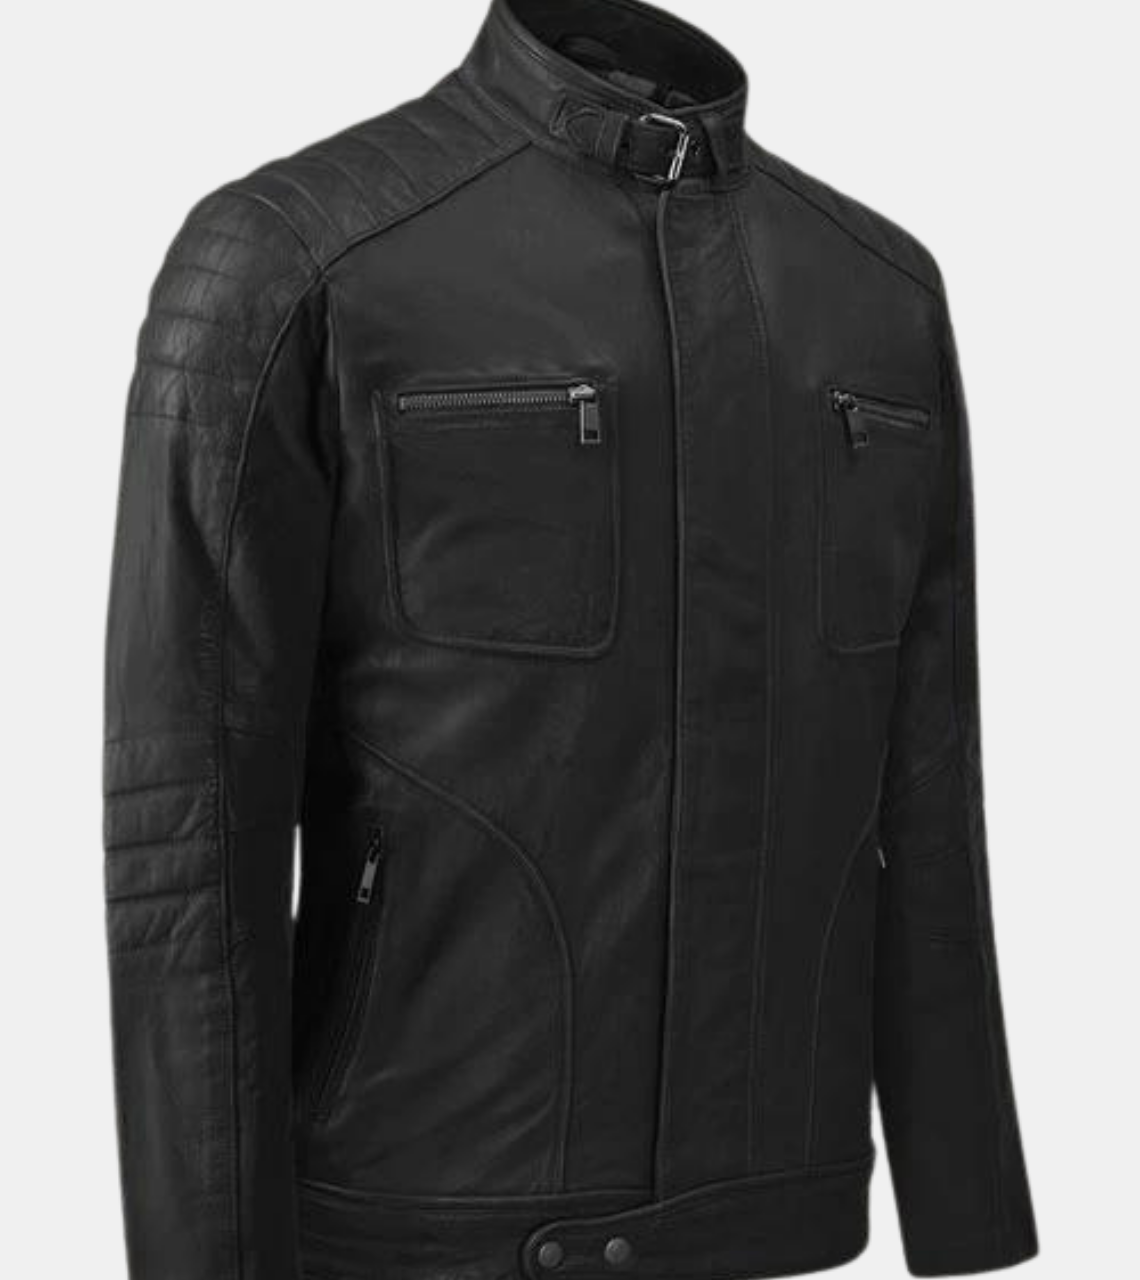  Black Quilted Leather Jacket